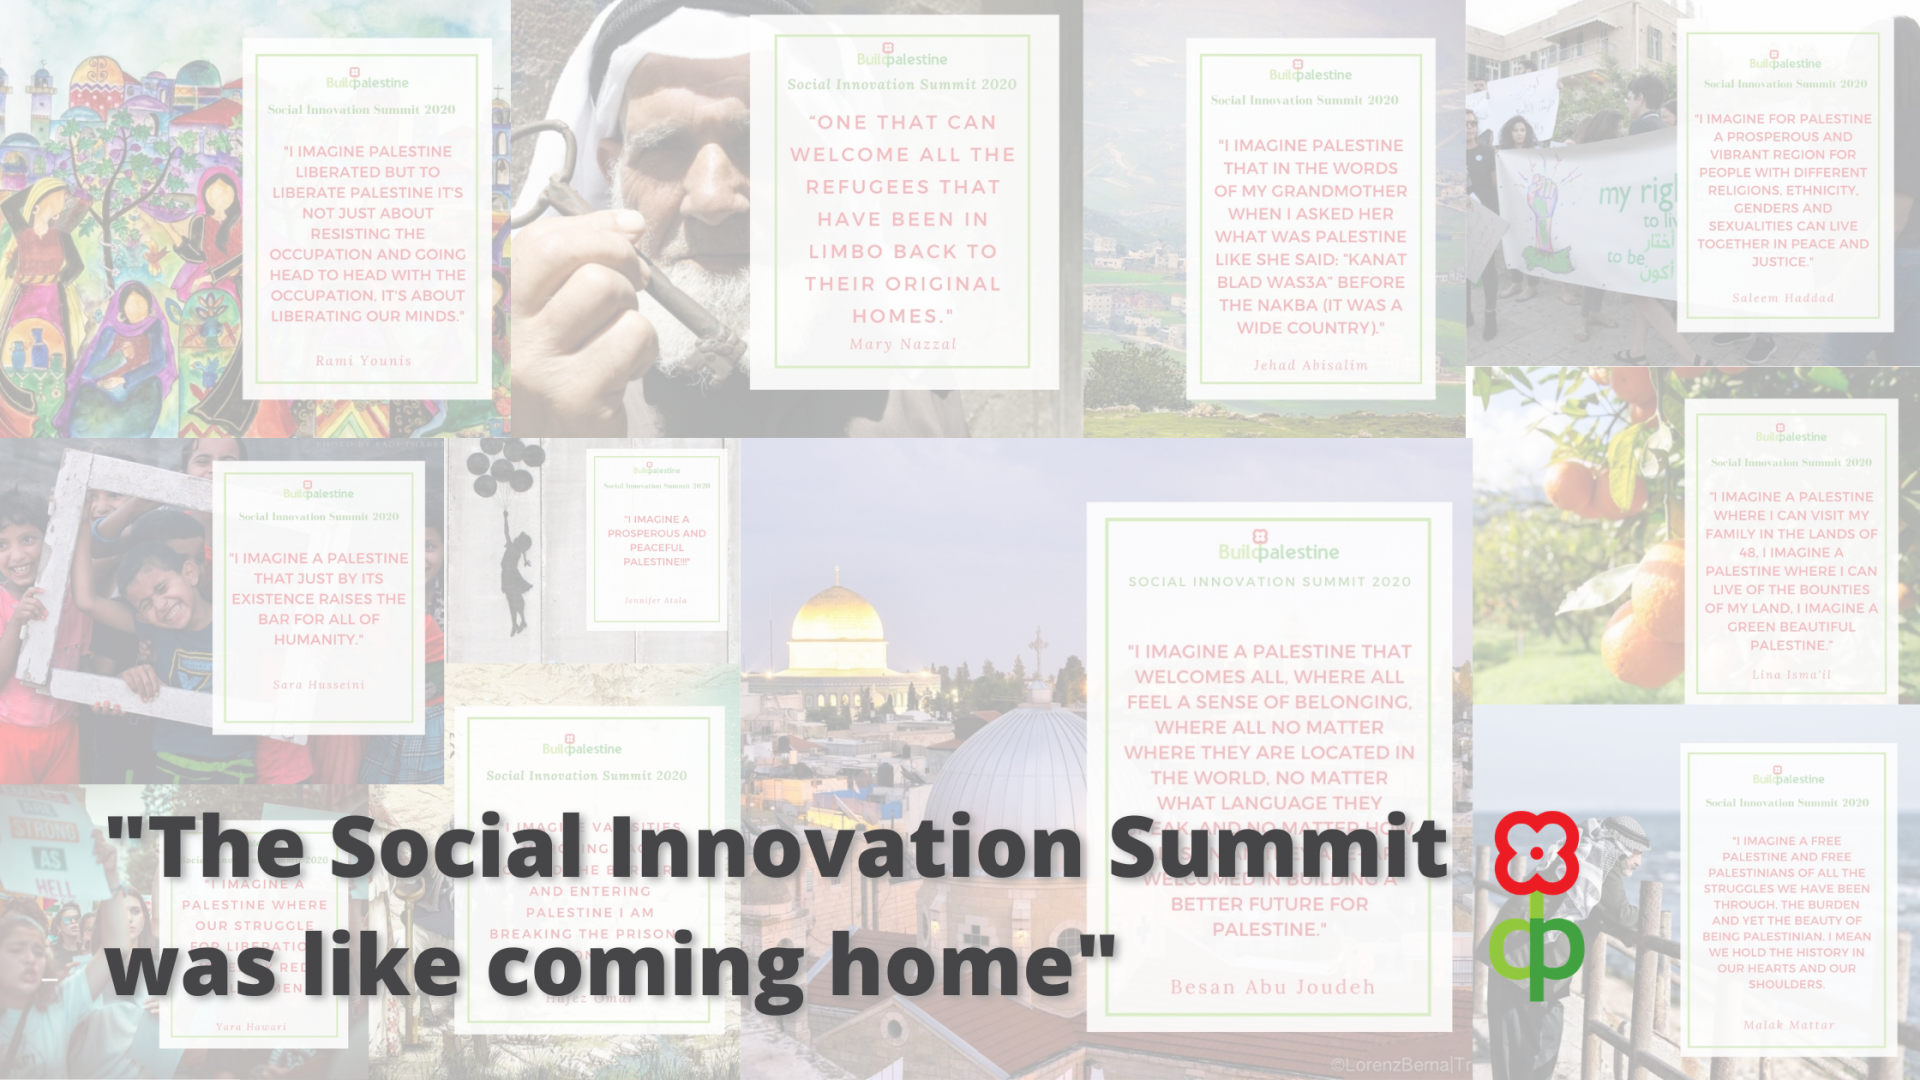 The Social Innovation Summit… “It was like coming home”